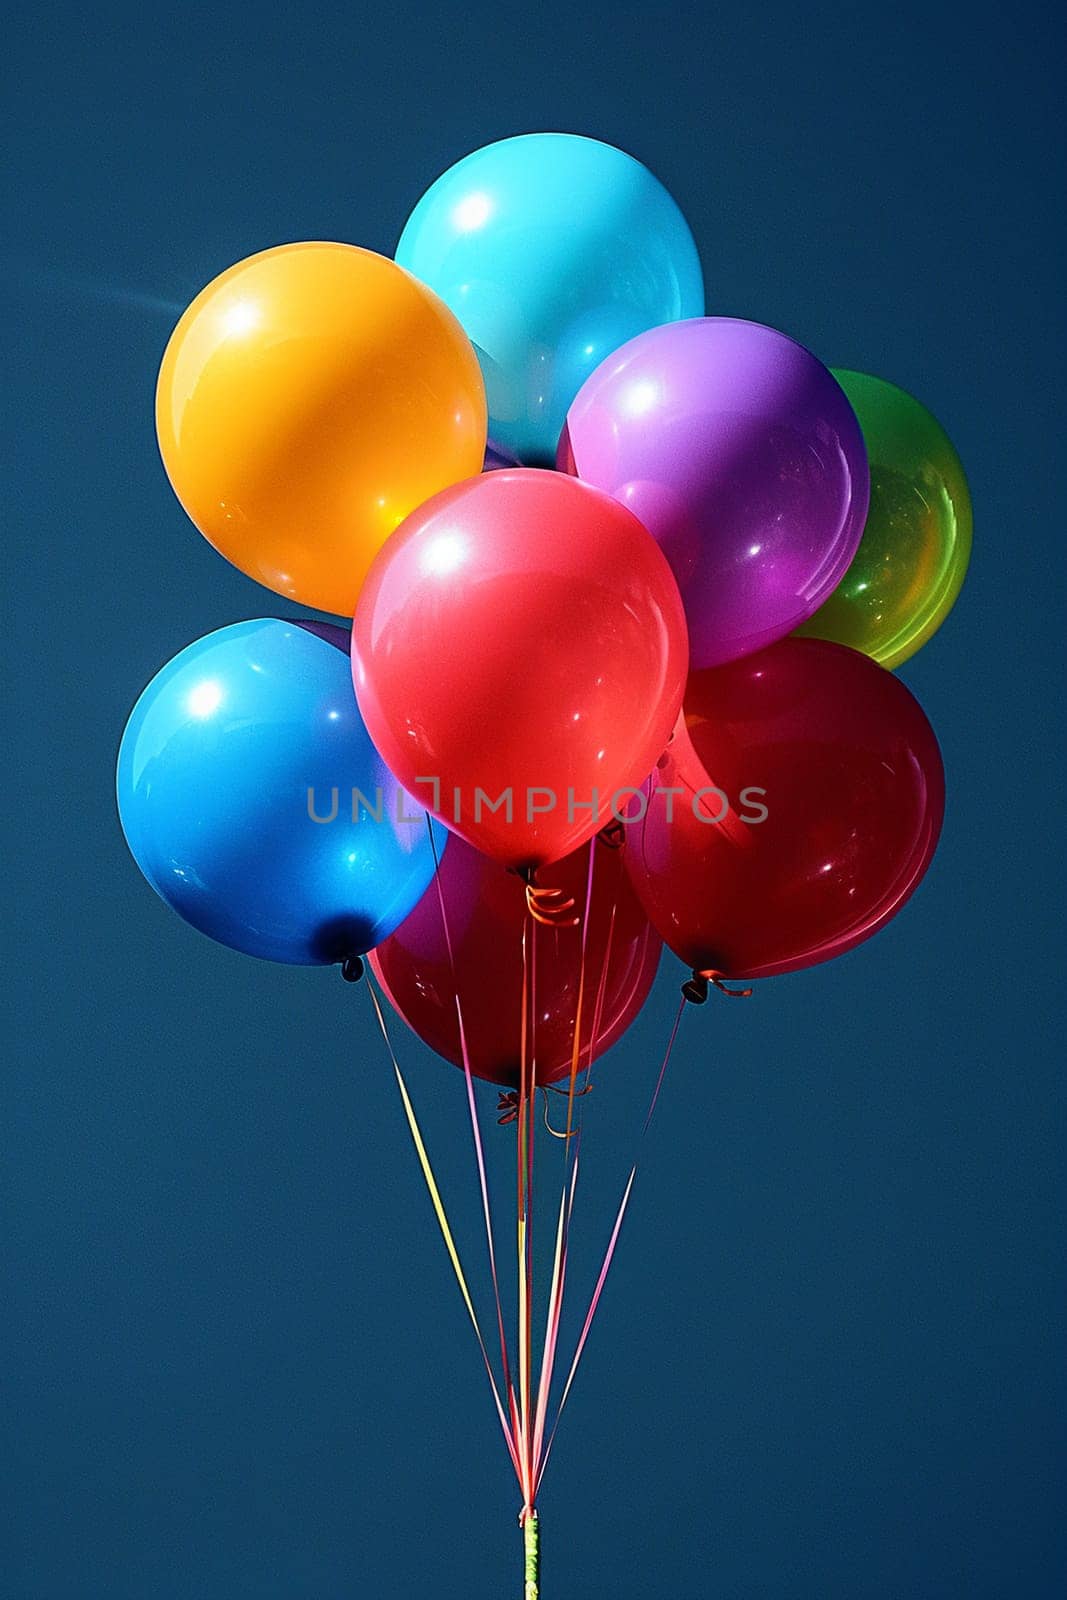 Vibrant balloons against a backdrop of a clear blue sky, symbolizing celebration and joy.